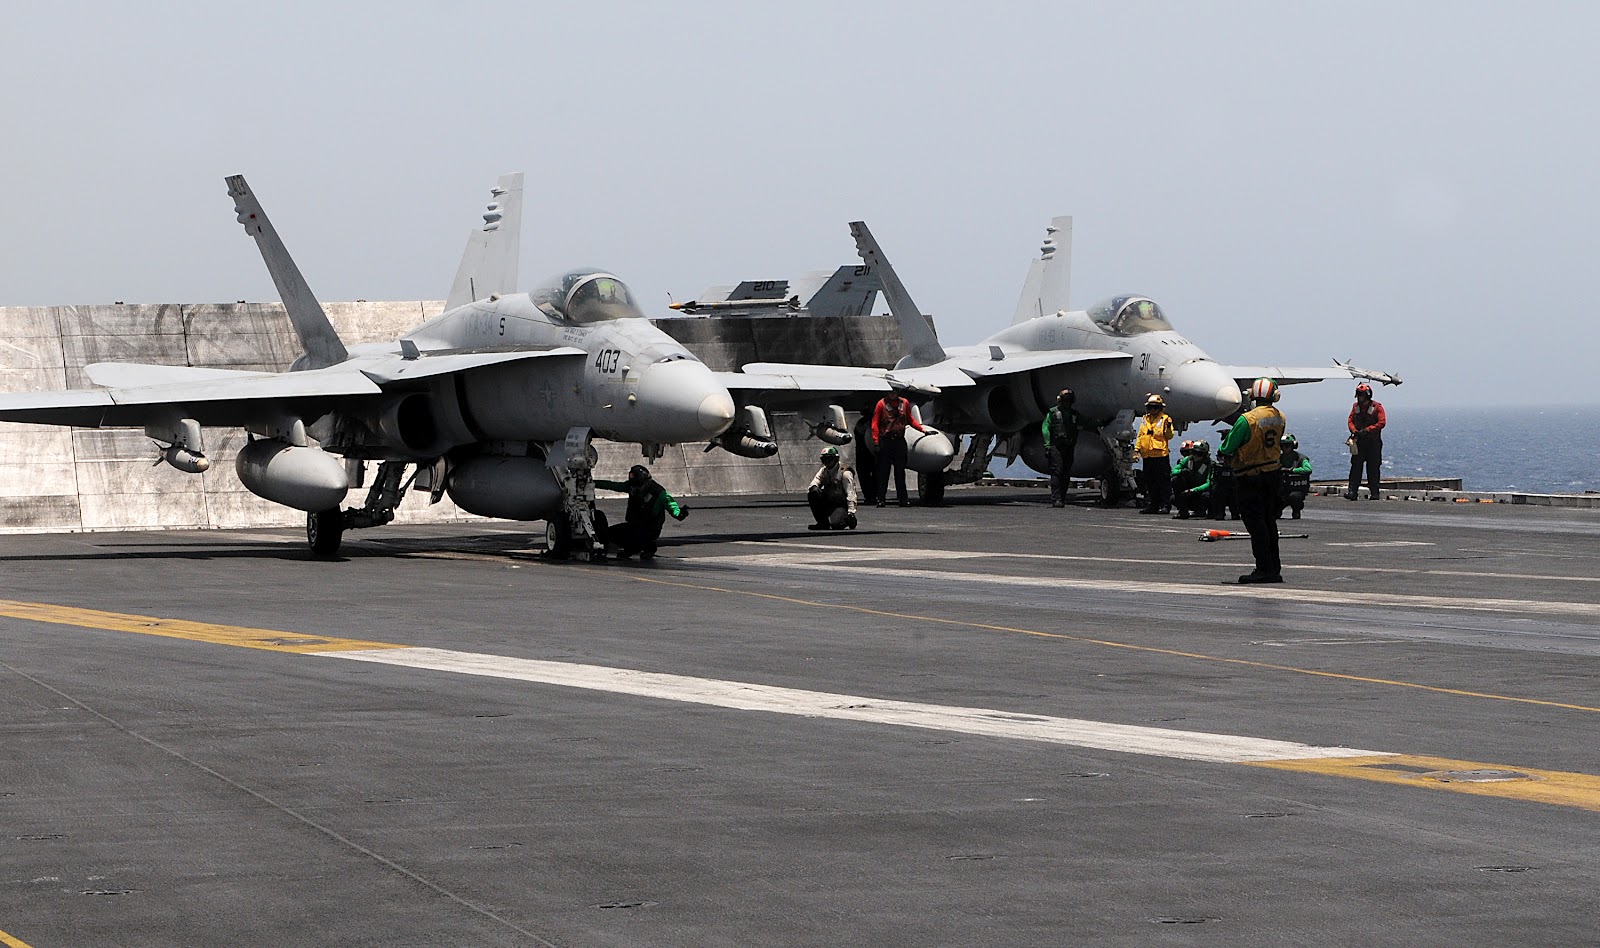 military, mcdonnell douglas f/a 18 hornet, aircraft, airplane, navy, ship, uss abraham lincoln, jet fighters